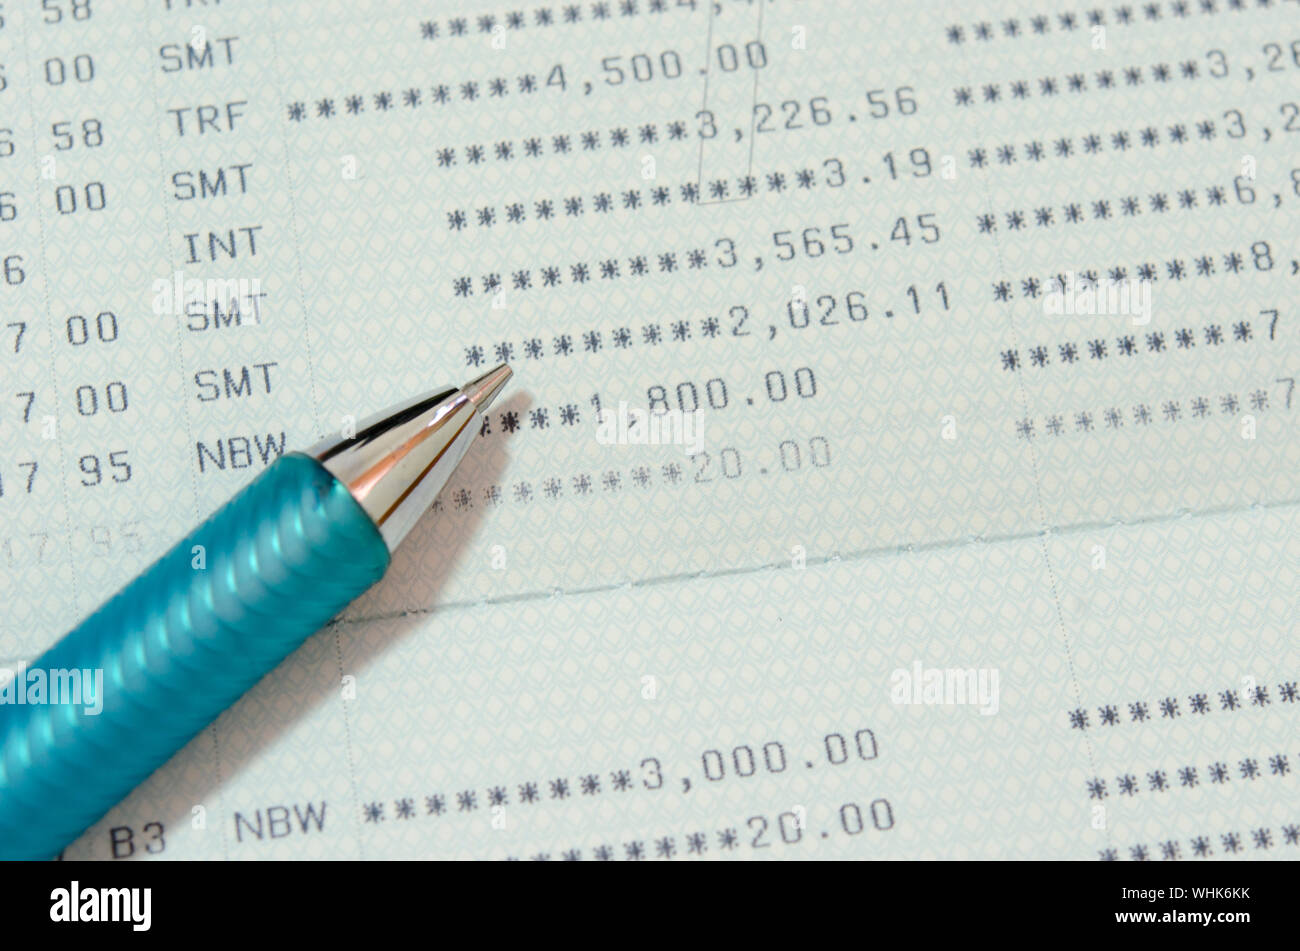 Close-up Of Pen On Bank Passbook Stock Photo